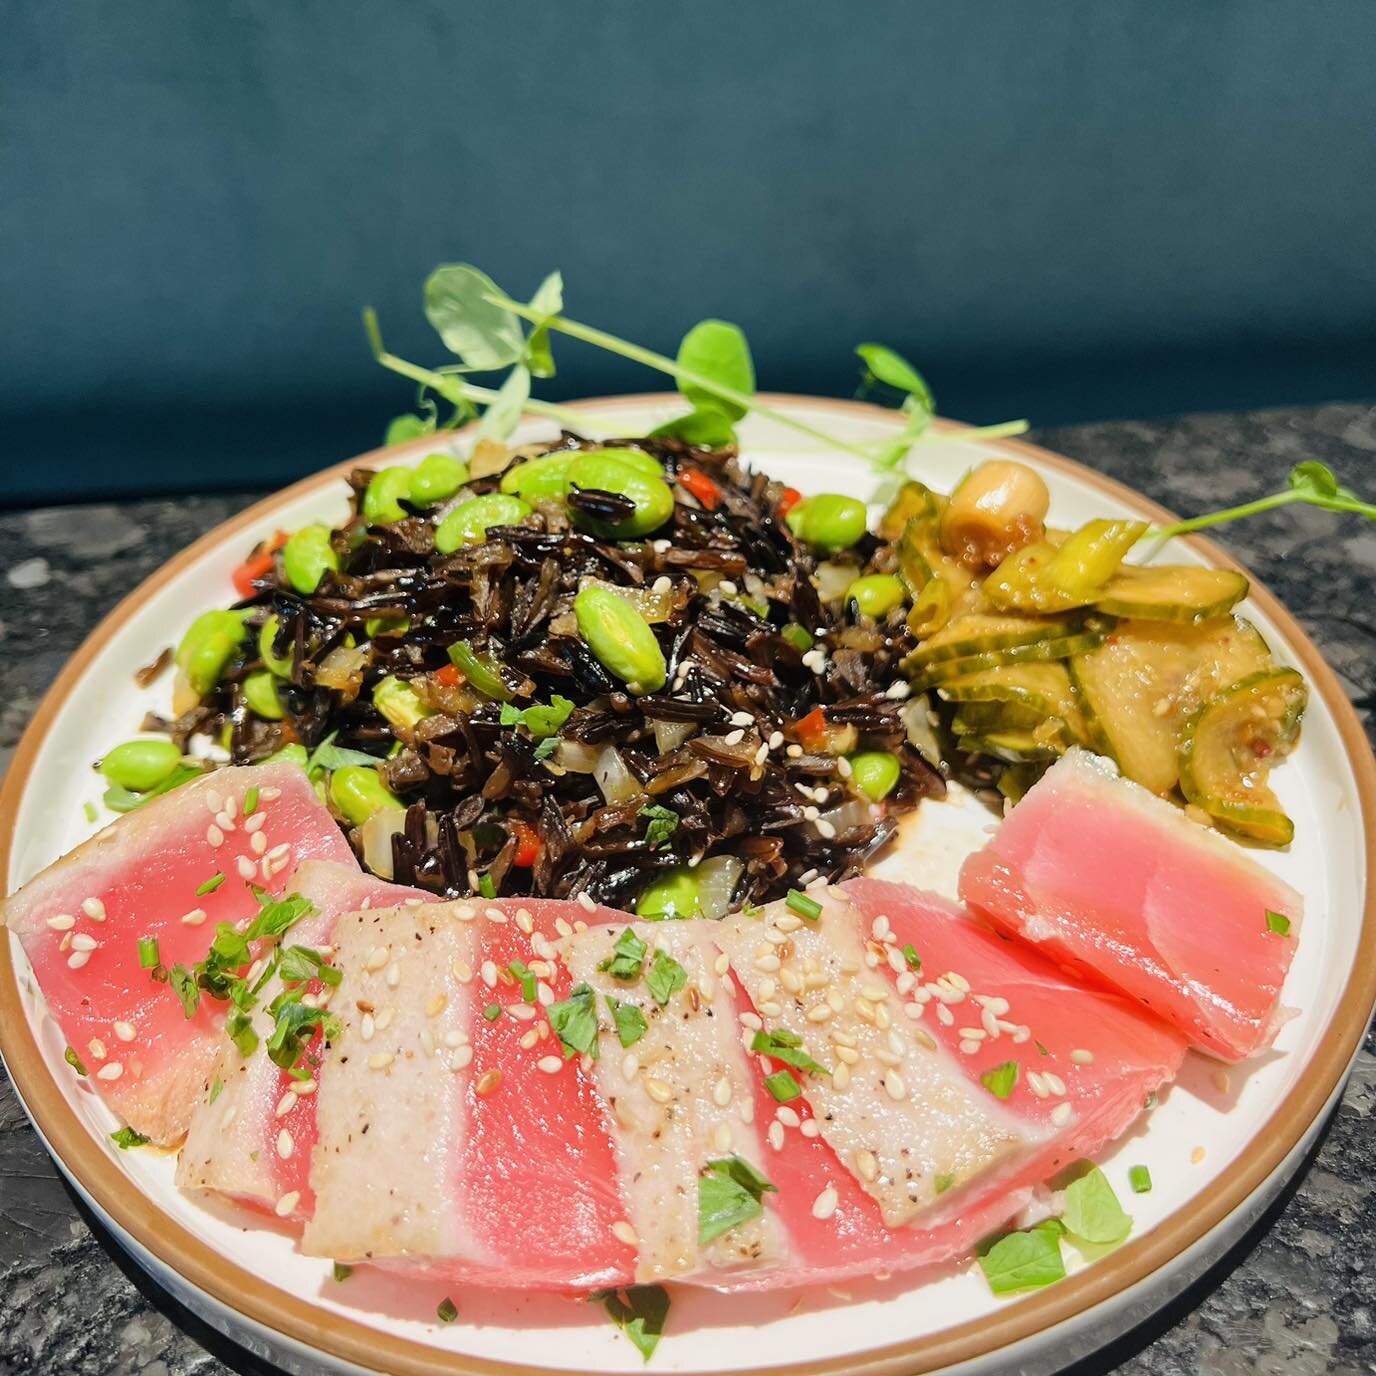 A cool lunch for a warm day! ☀️😎 We&rsquo;re ready for you!

👉🏼 Saku Tuna served with an Asian wild rice and Thai style pickles

👉🏼 Soup of the Day: Shiner Bock Chili
👉🏼 Veggie of the Day: Broccolini with garlic, shallots and herbs

#todayslun